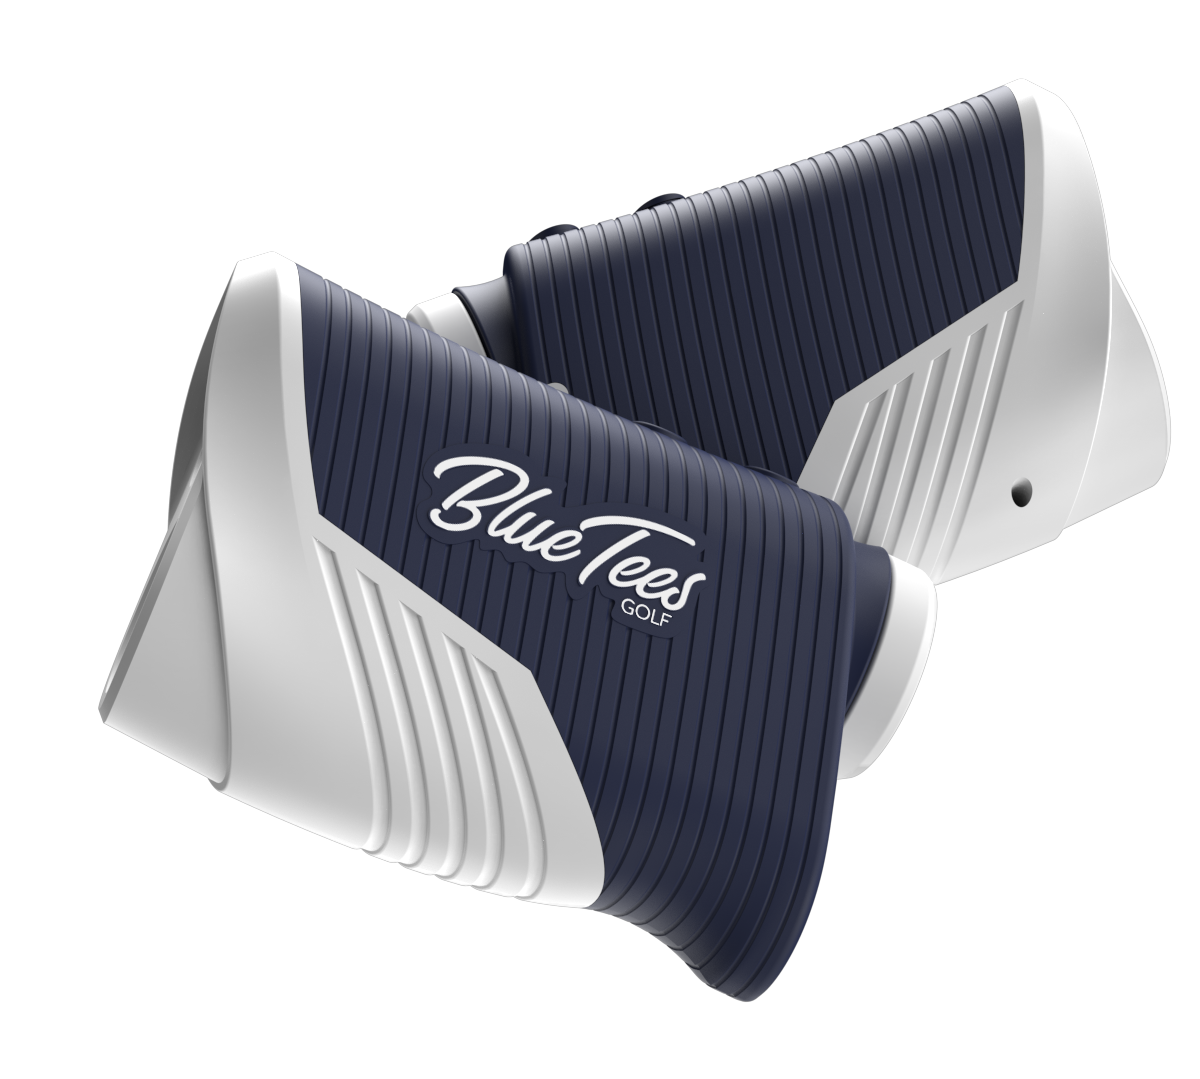 Blue Tees Golf 3 Max Laser Rangefinder engineered with precision accuracy